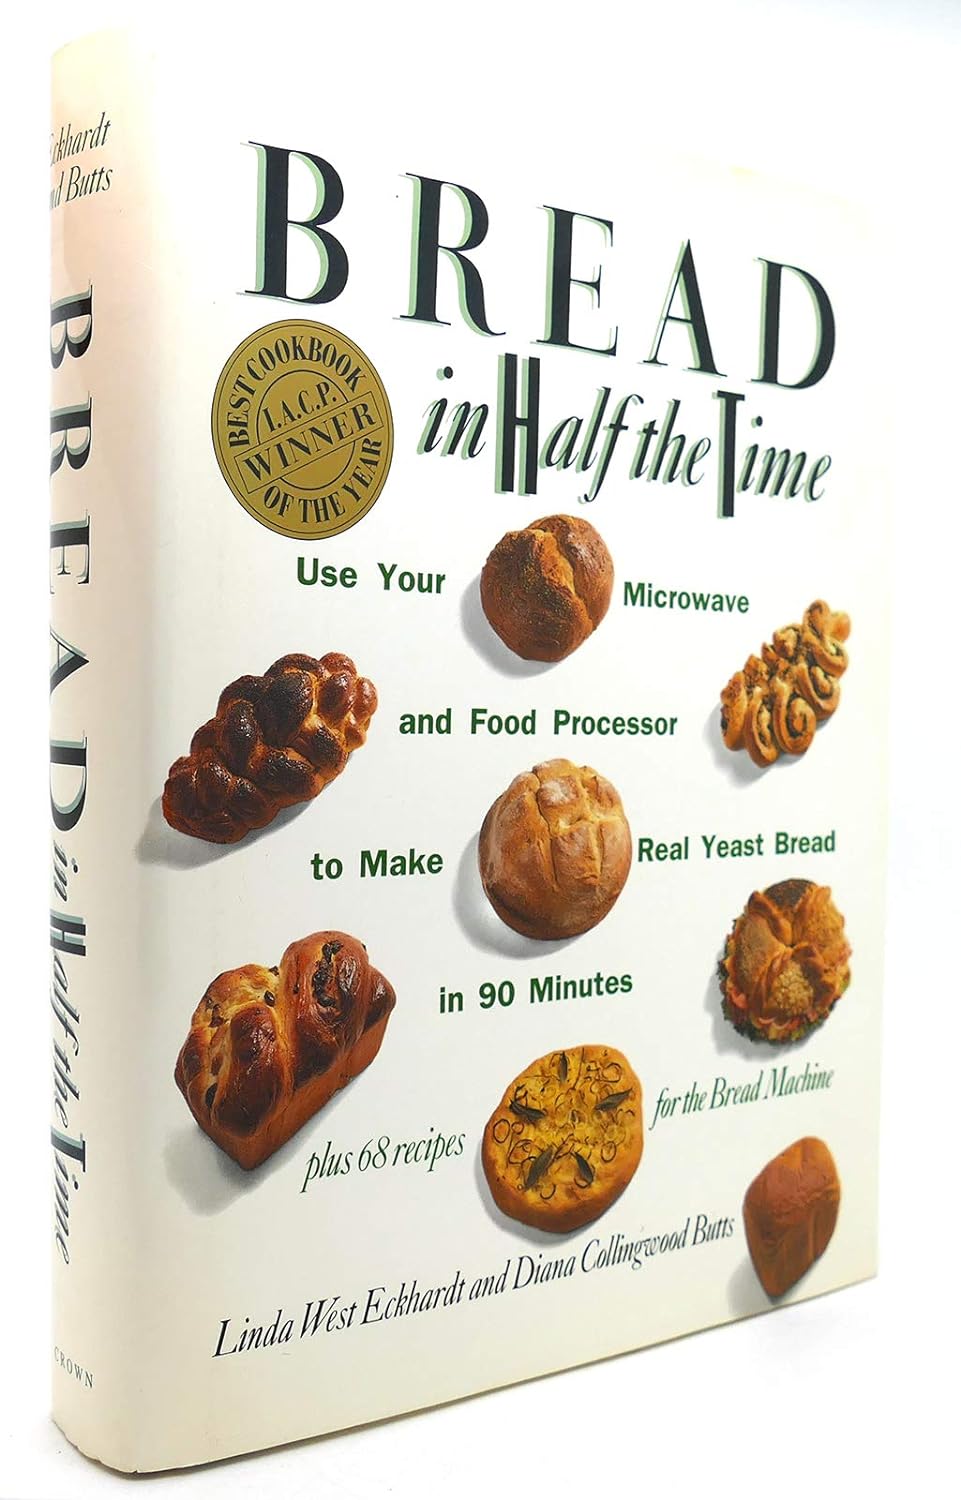 Bread In Half The Time: Use Your Microwave and Food Processor to Make Real Yeast Bread in 90 Minutes by Diana Collingwood Butts and Lina West Eckhardt